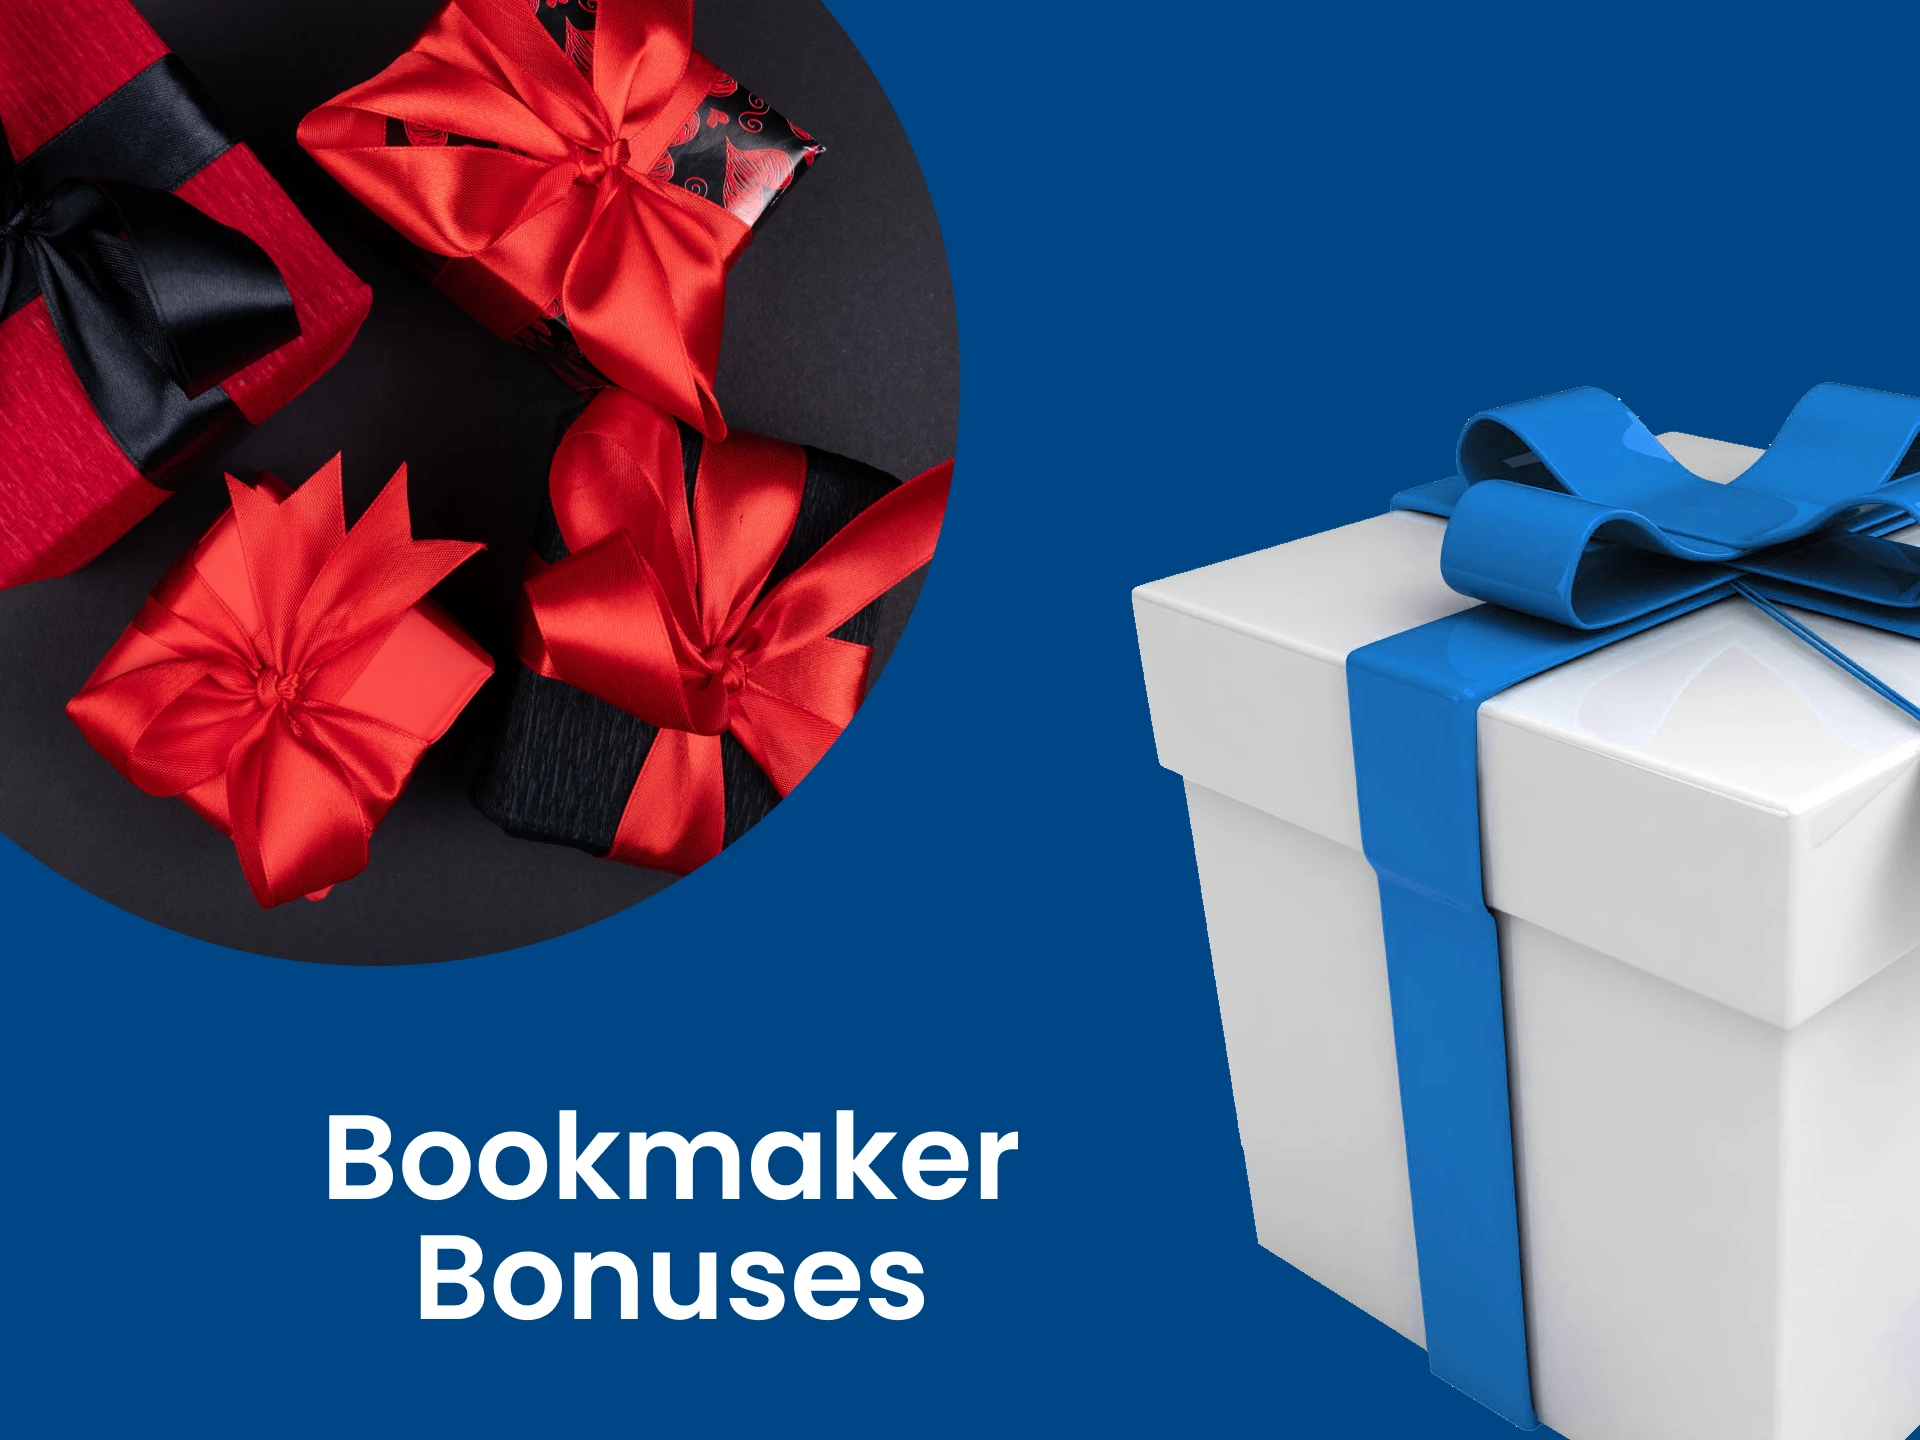 Choose a bookmaker site with a large number of quality bonuses.